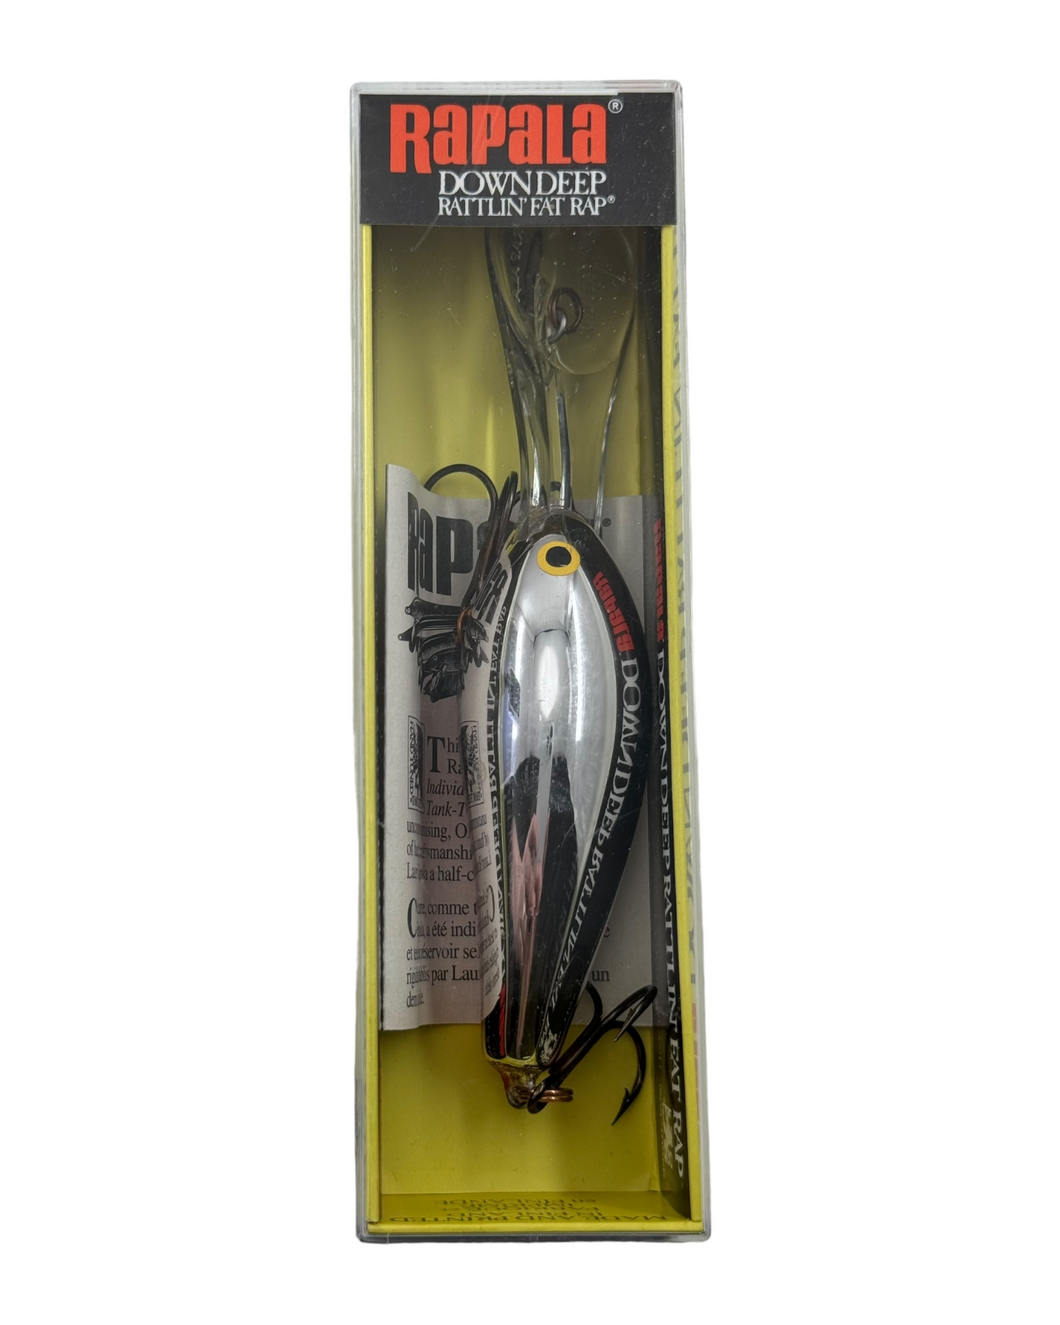 RAPALA LURES DOWN DEEP RATTLIN FAT RAP 7 Fishing Lure • CH – Toad